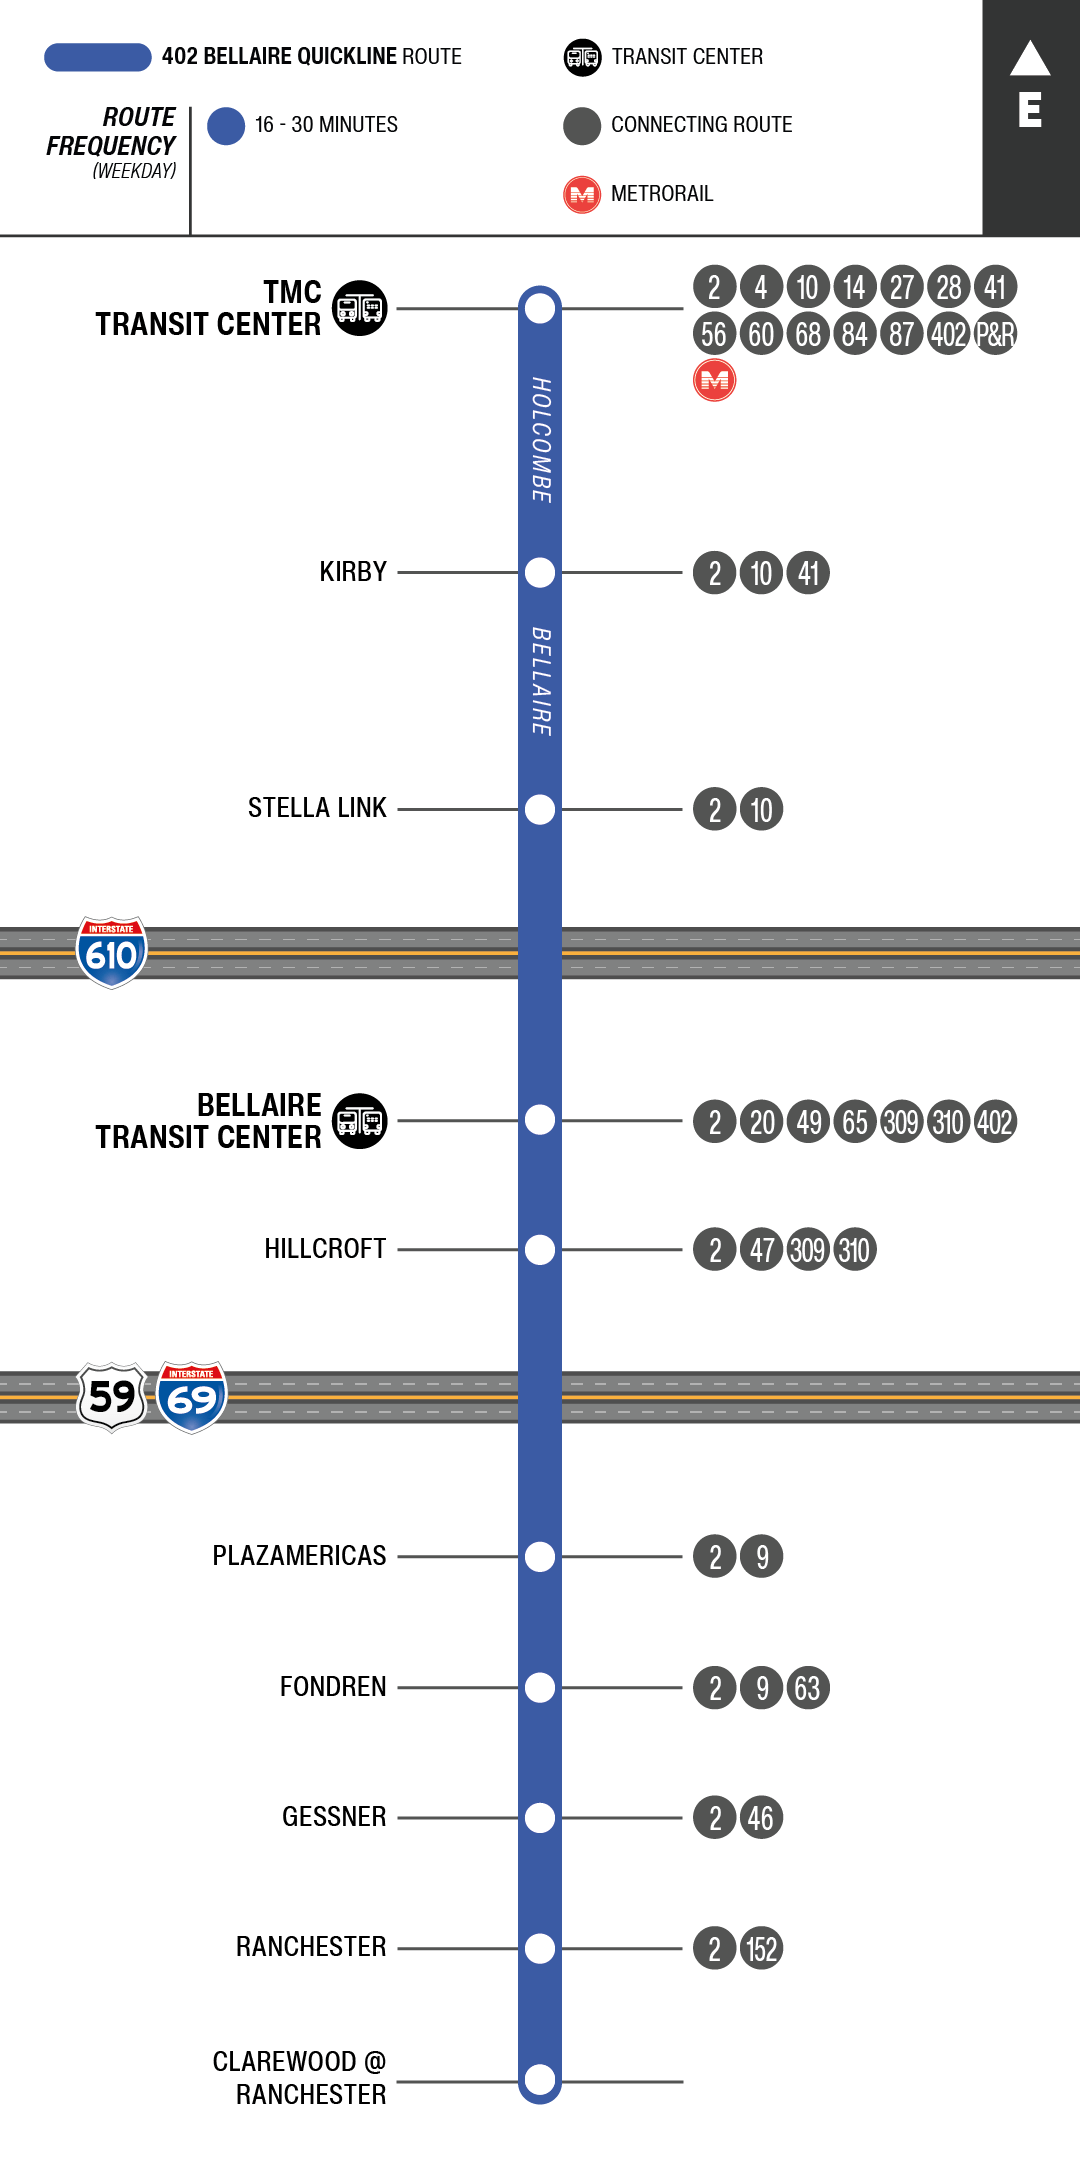 Route map for 402 Bellaire Quickline bus